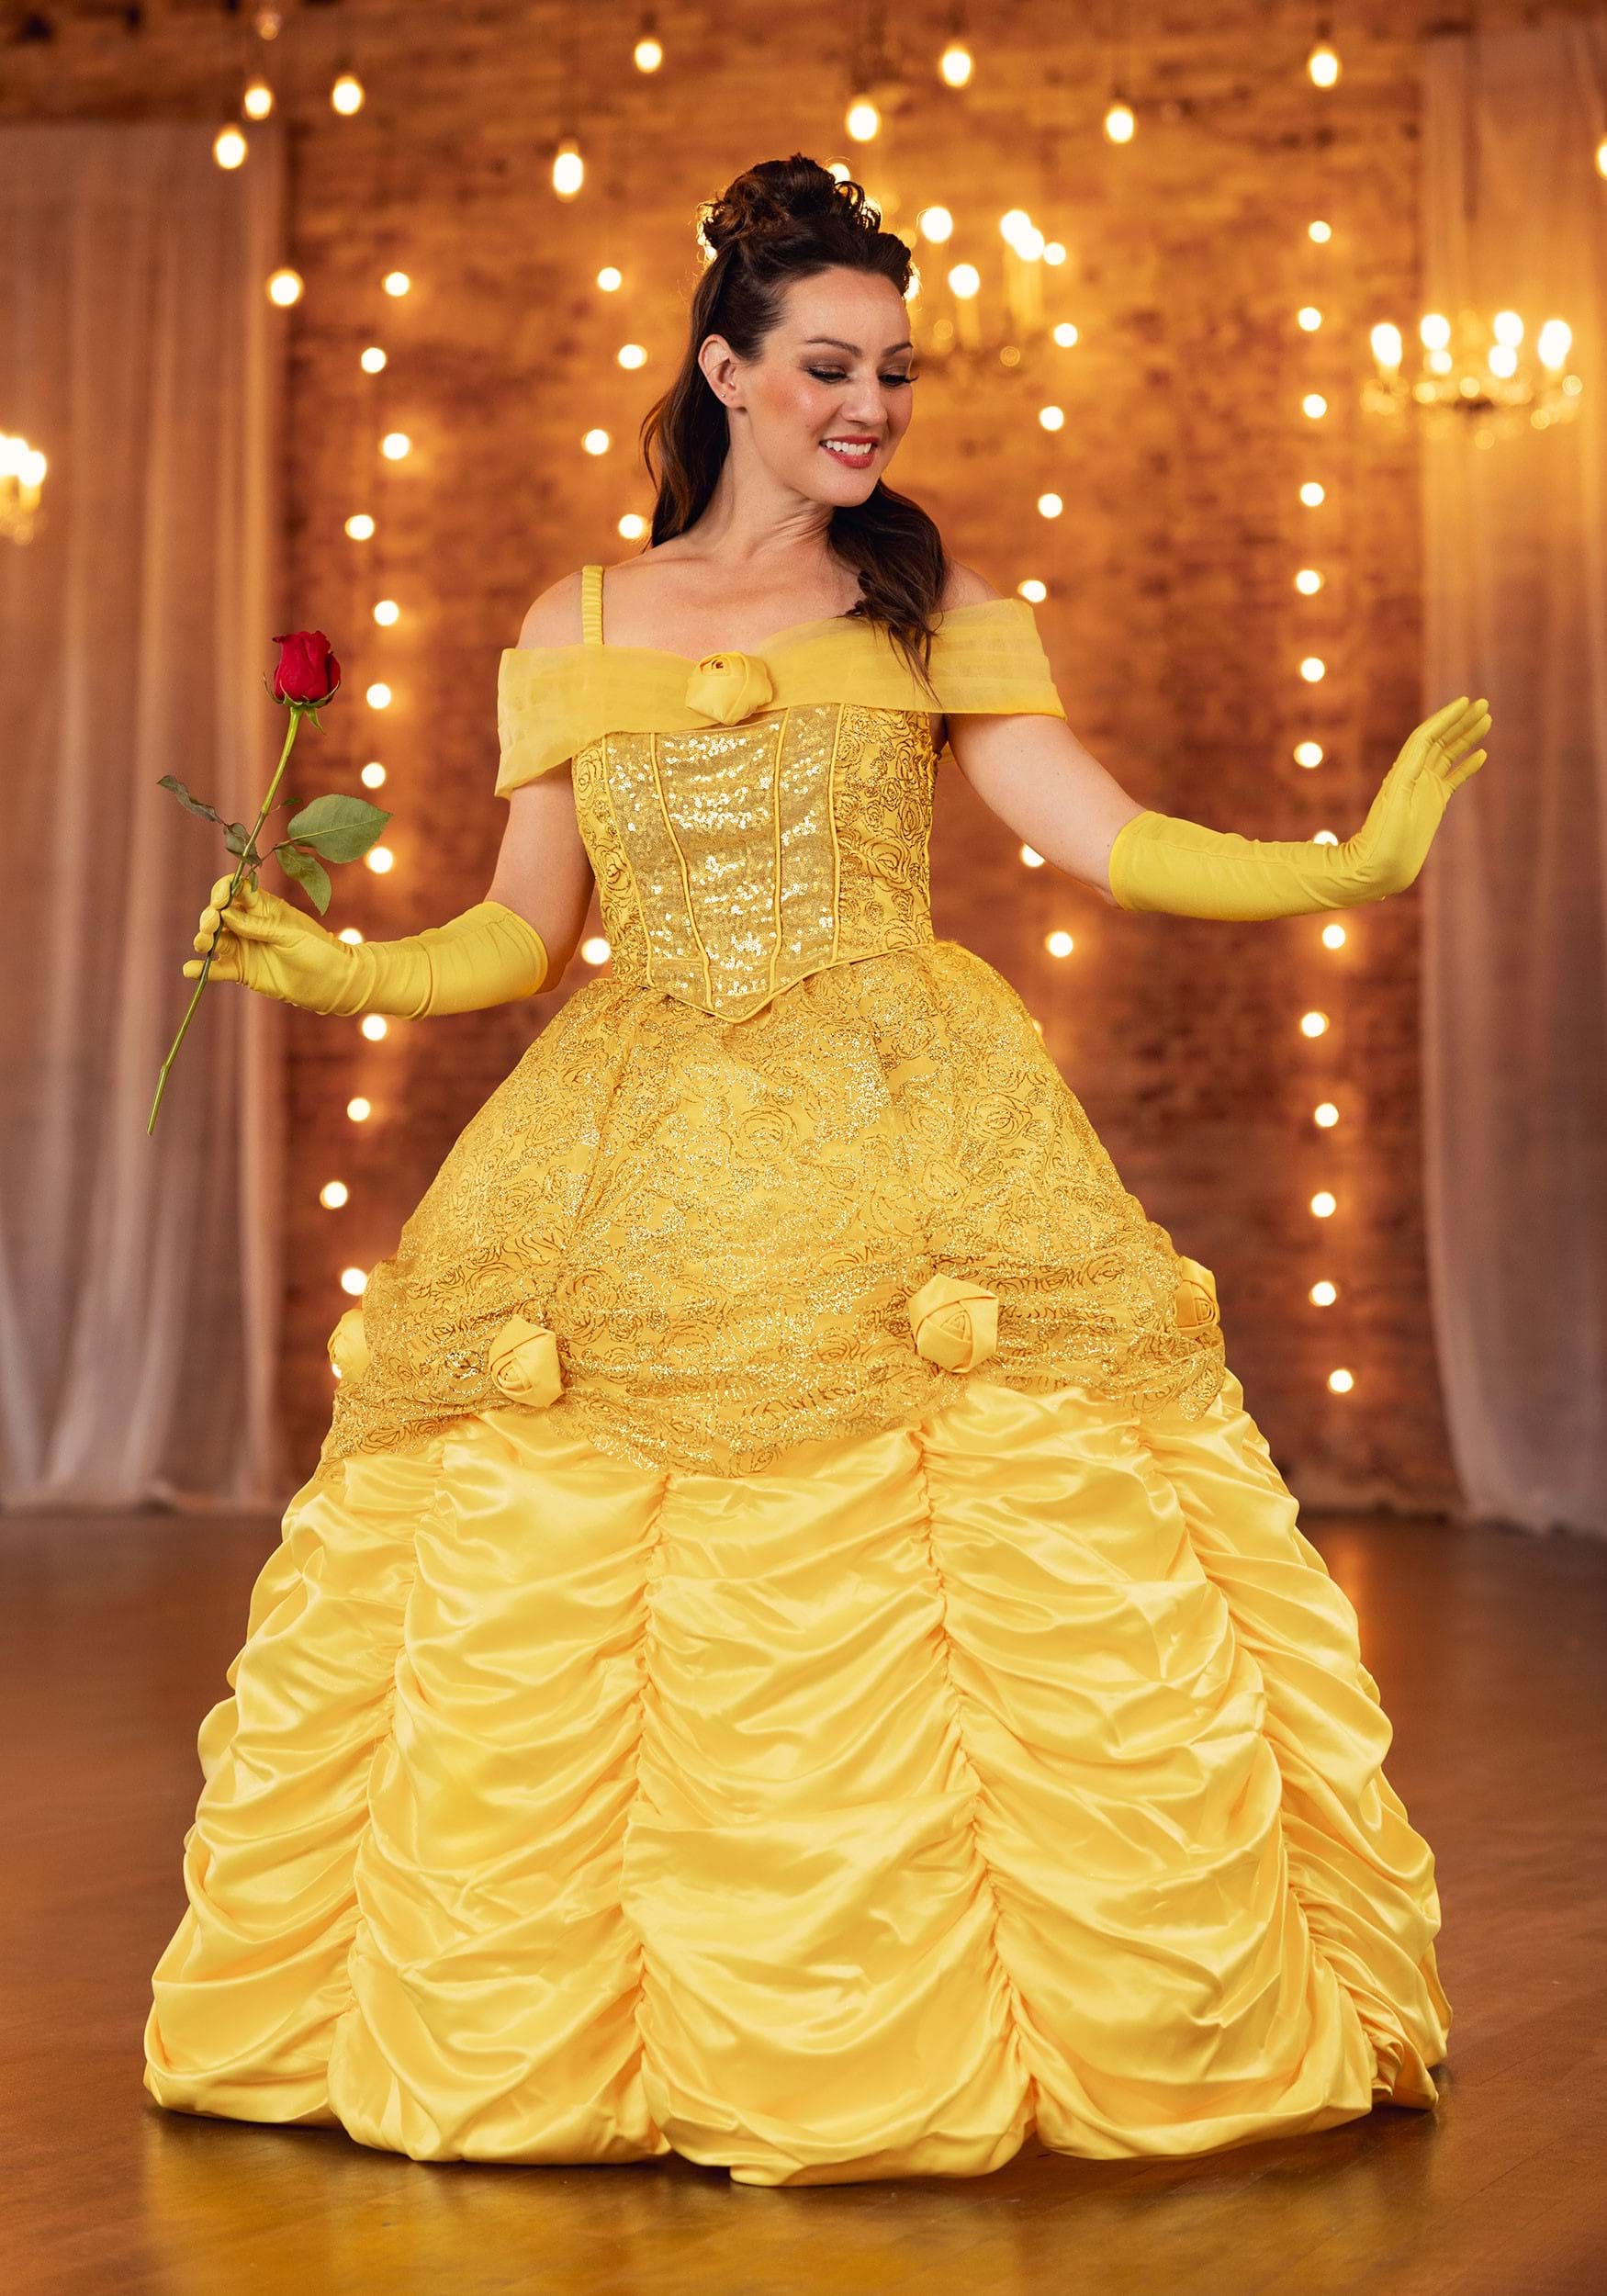 Hand Made 1756 Belle Ball Gown (of Beauty and the Beast)